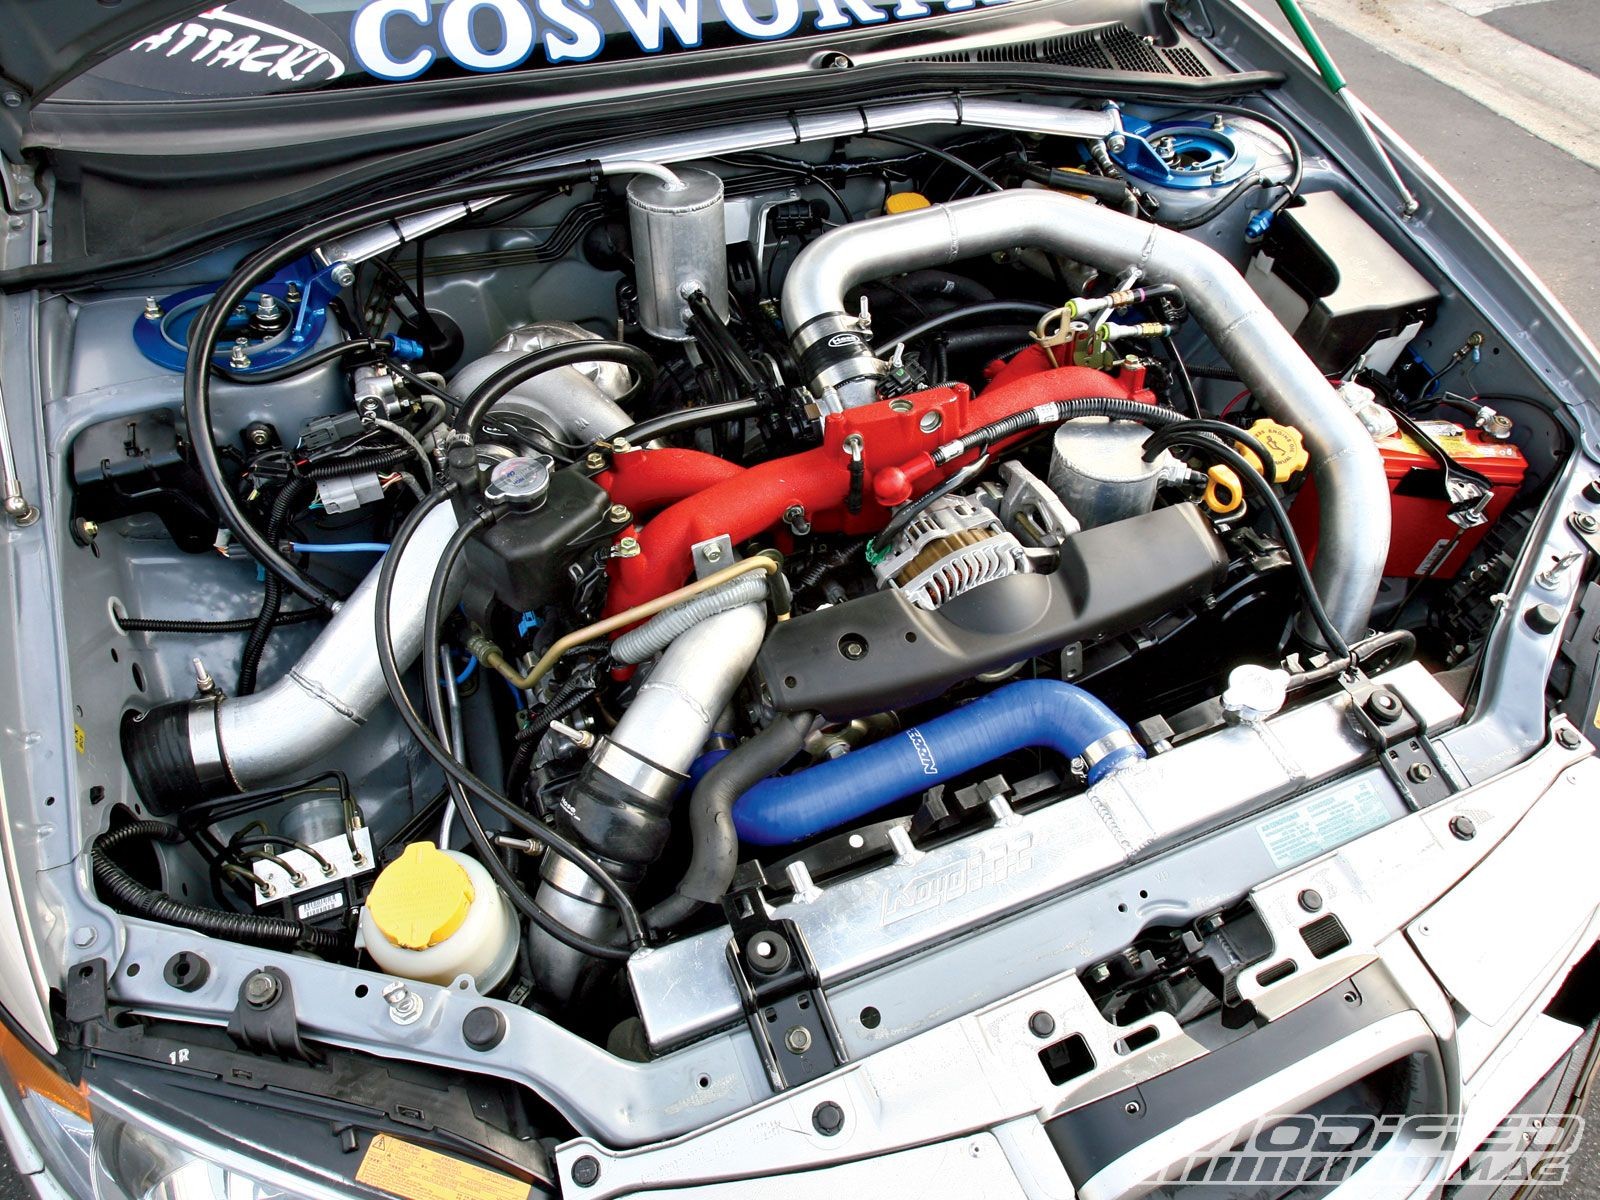 Wrx Engine Bay Diagram Wrx Engine Bay Diagram Subaru Powered Datsun 240z Builds and Of Wrx Engine Bay Diagram